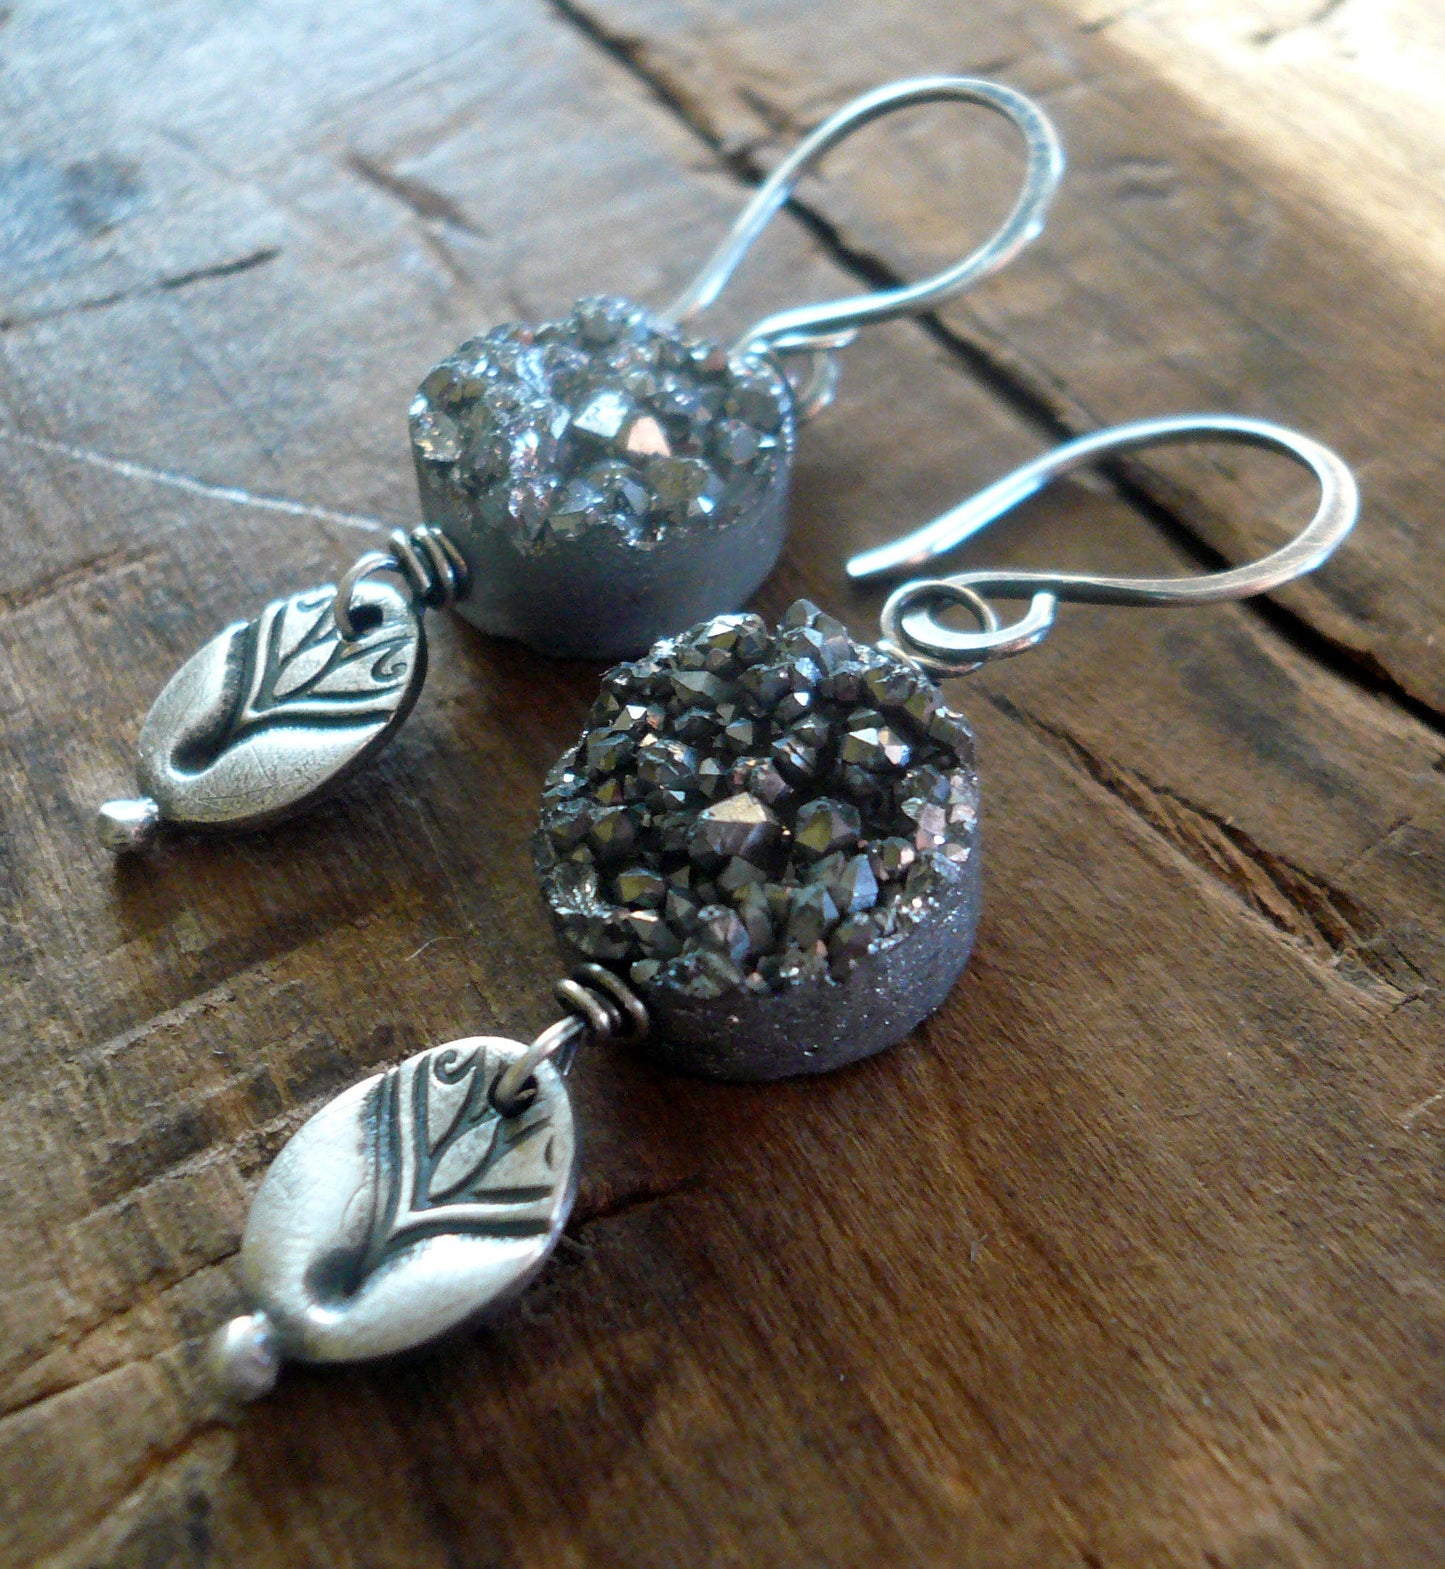 Noceur Round Earrings - Handmade. Oxidized fine and sterling silver. Druzy